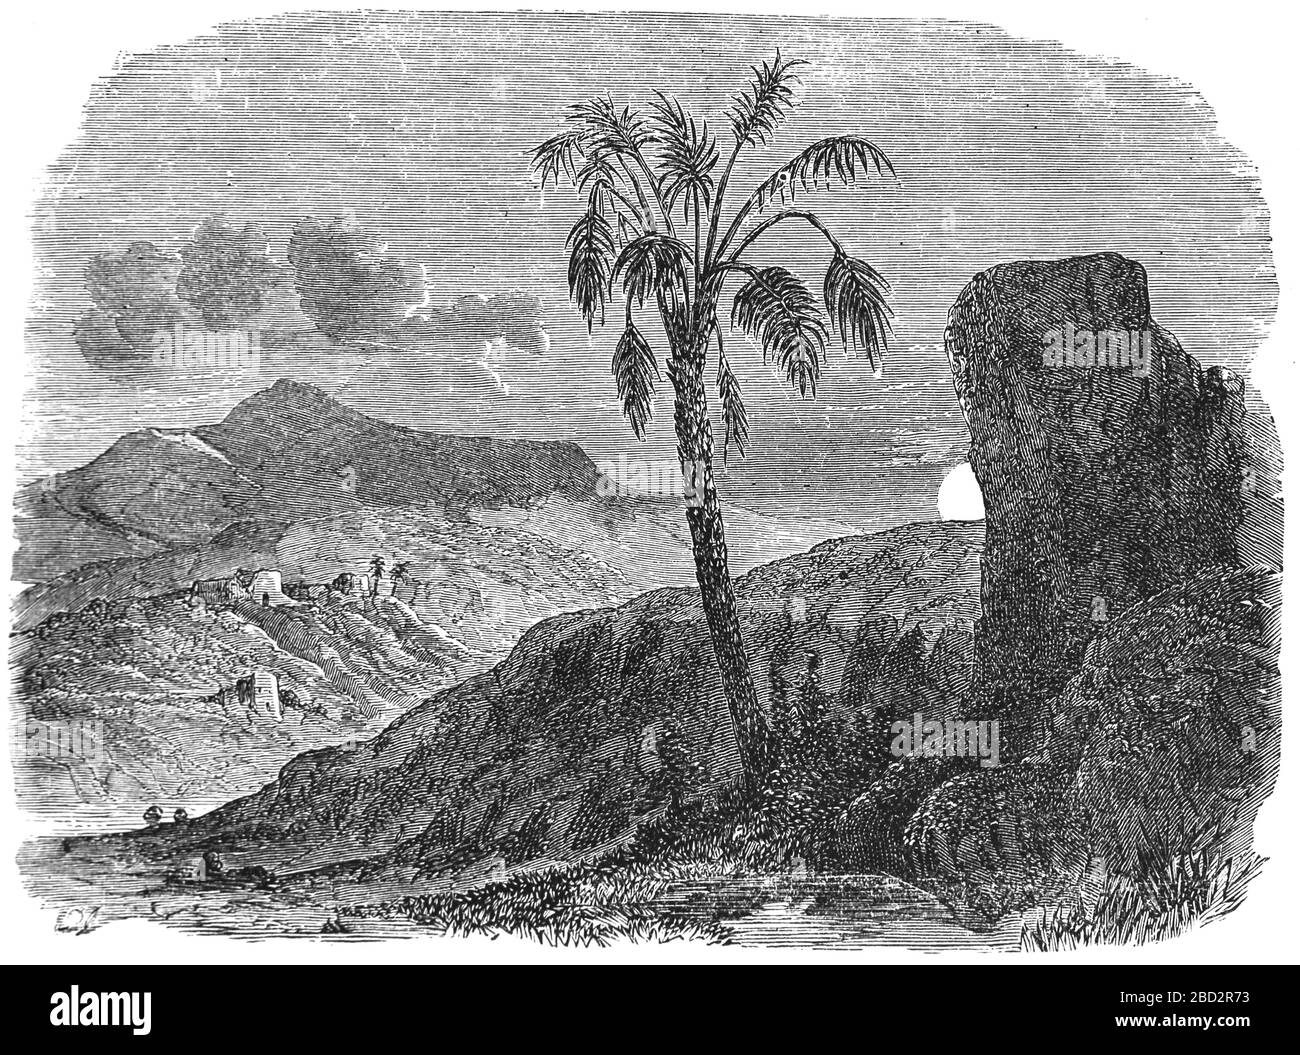 Bethsaida. Place mentioned in the New Testament. Bethsaida wa the hometown of the apostles Peter, Andrew and Philip. Engraving, 19th century. Stock Photo